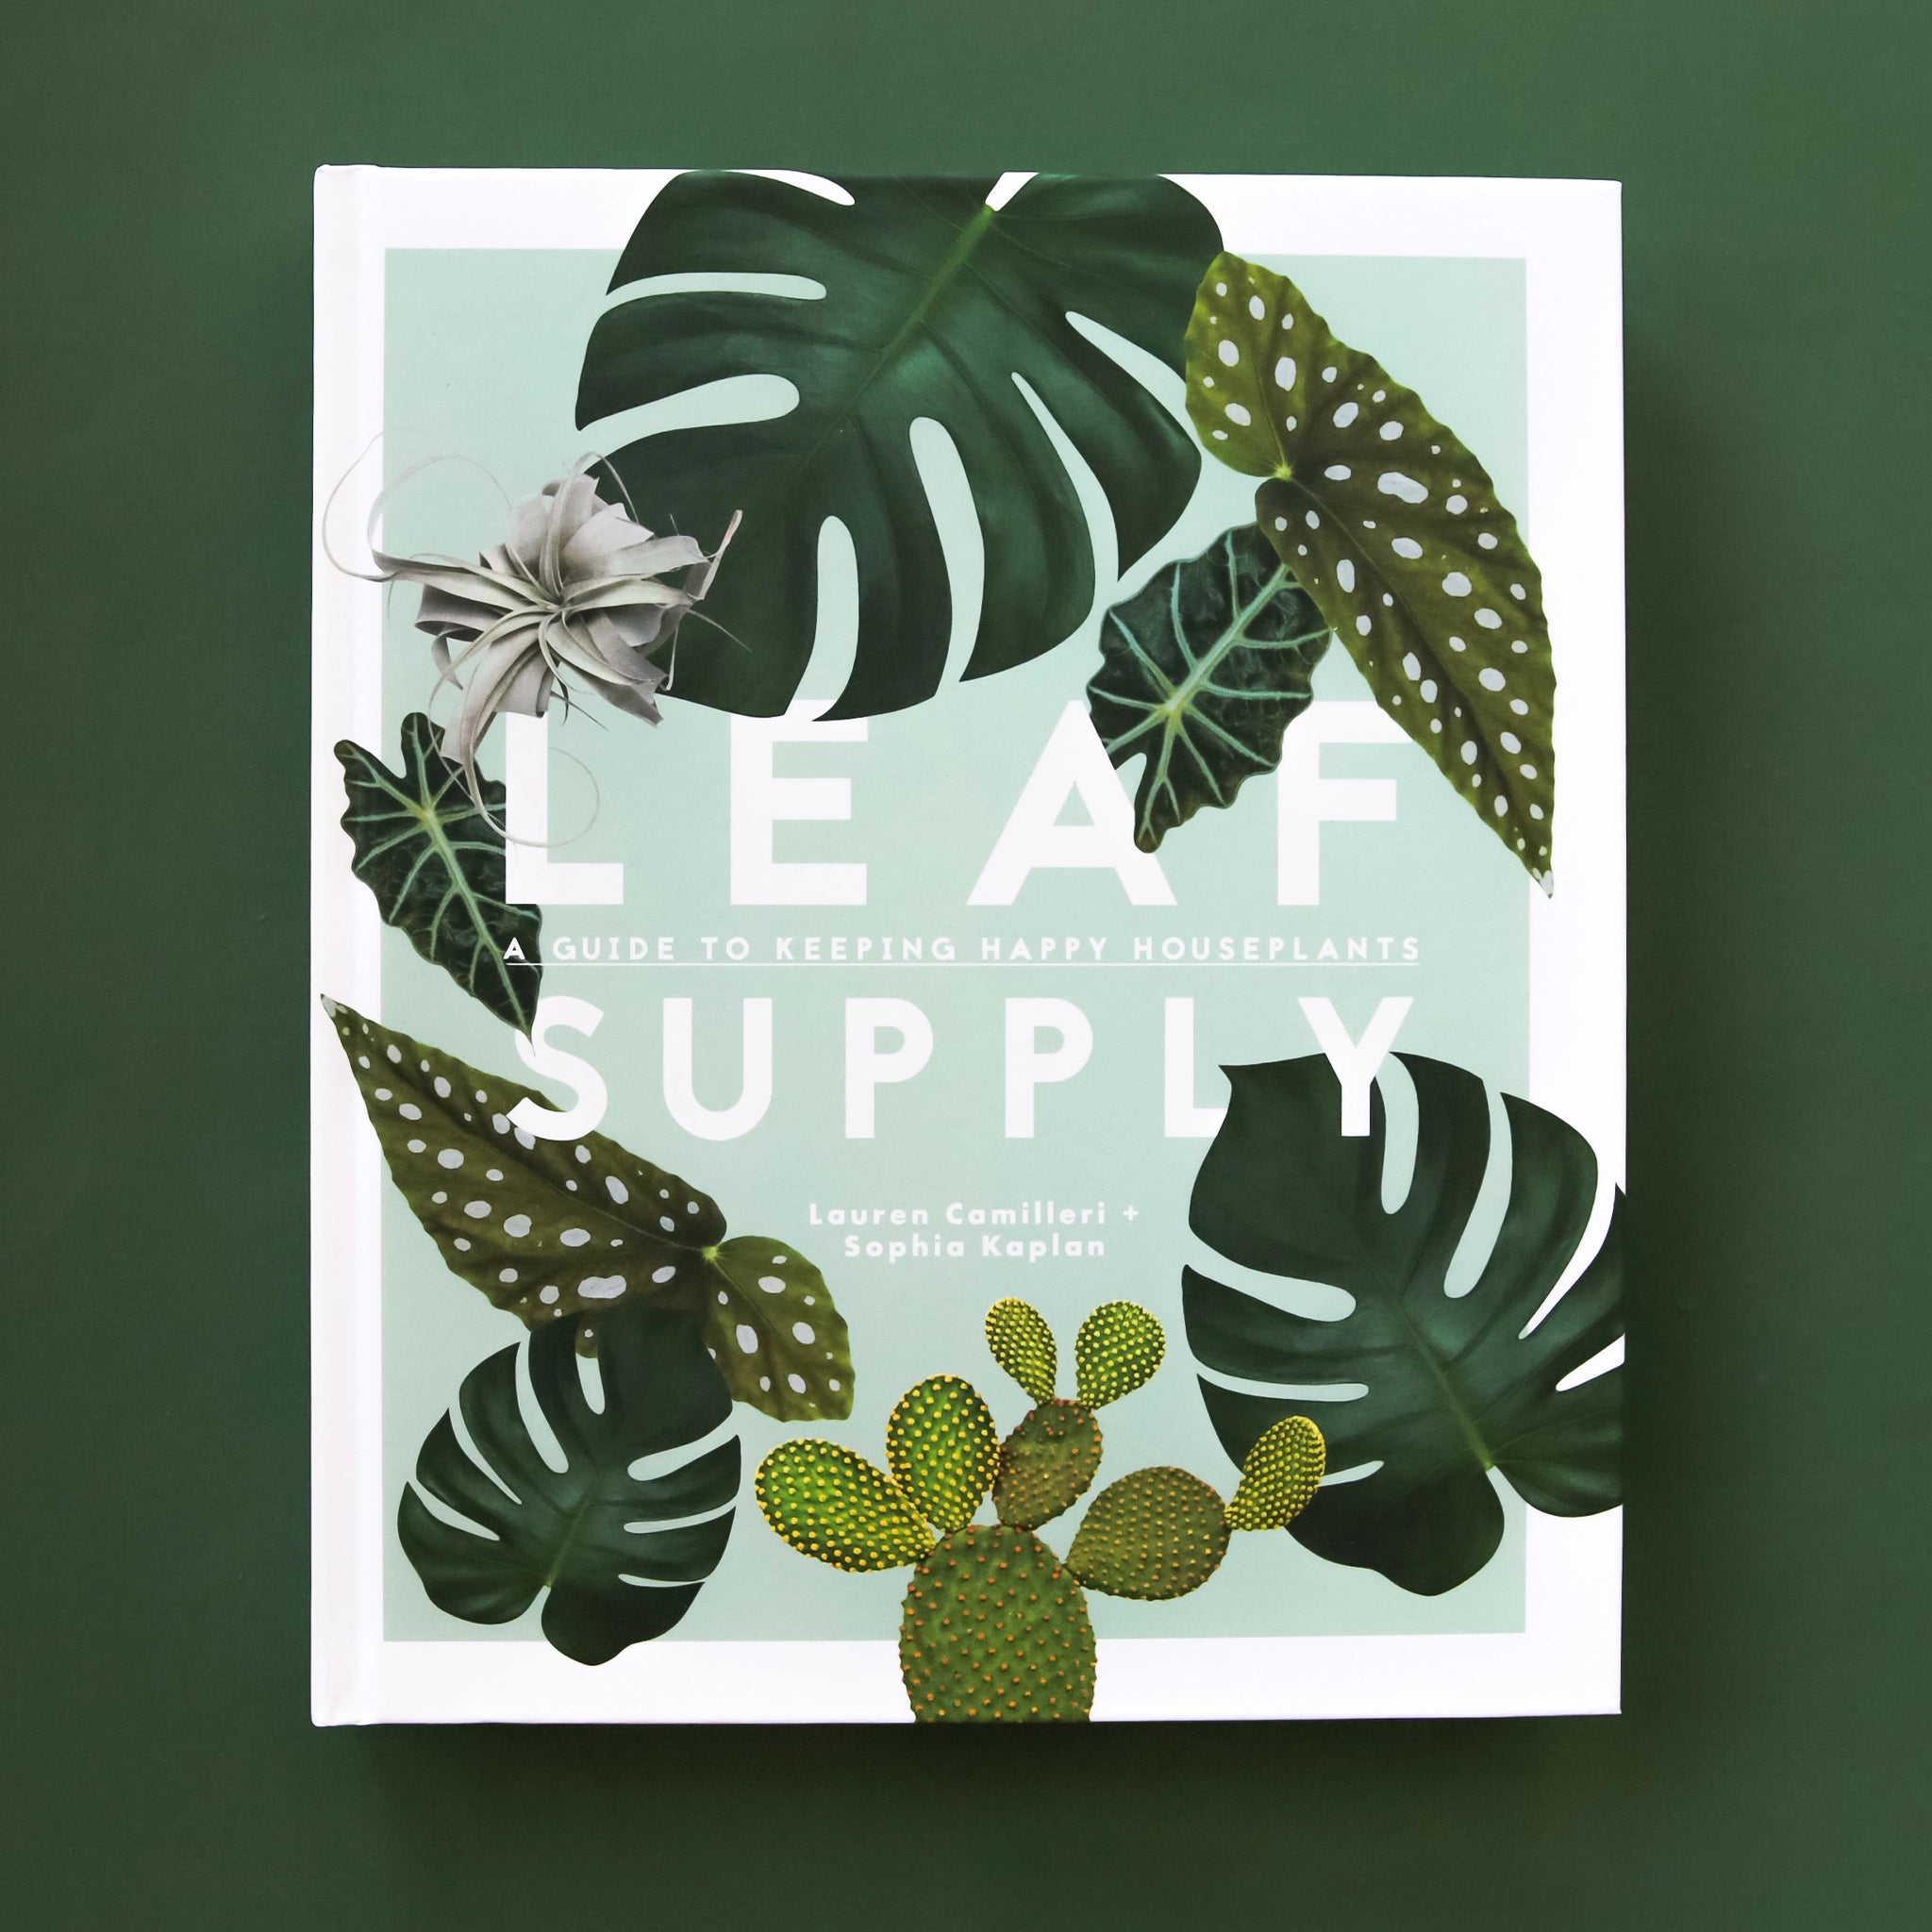 On a green background is a photograph of a mint green book cover with various house plant leaves on the front as well as white text that reads, &quot;Lead Supply A Guide To Keeping Happy House Plants&quot;.